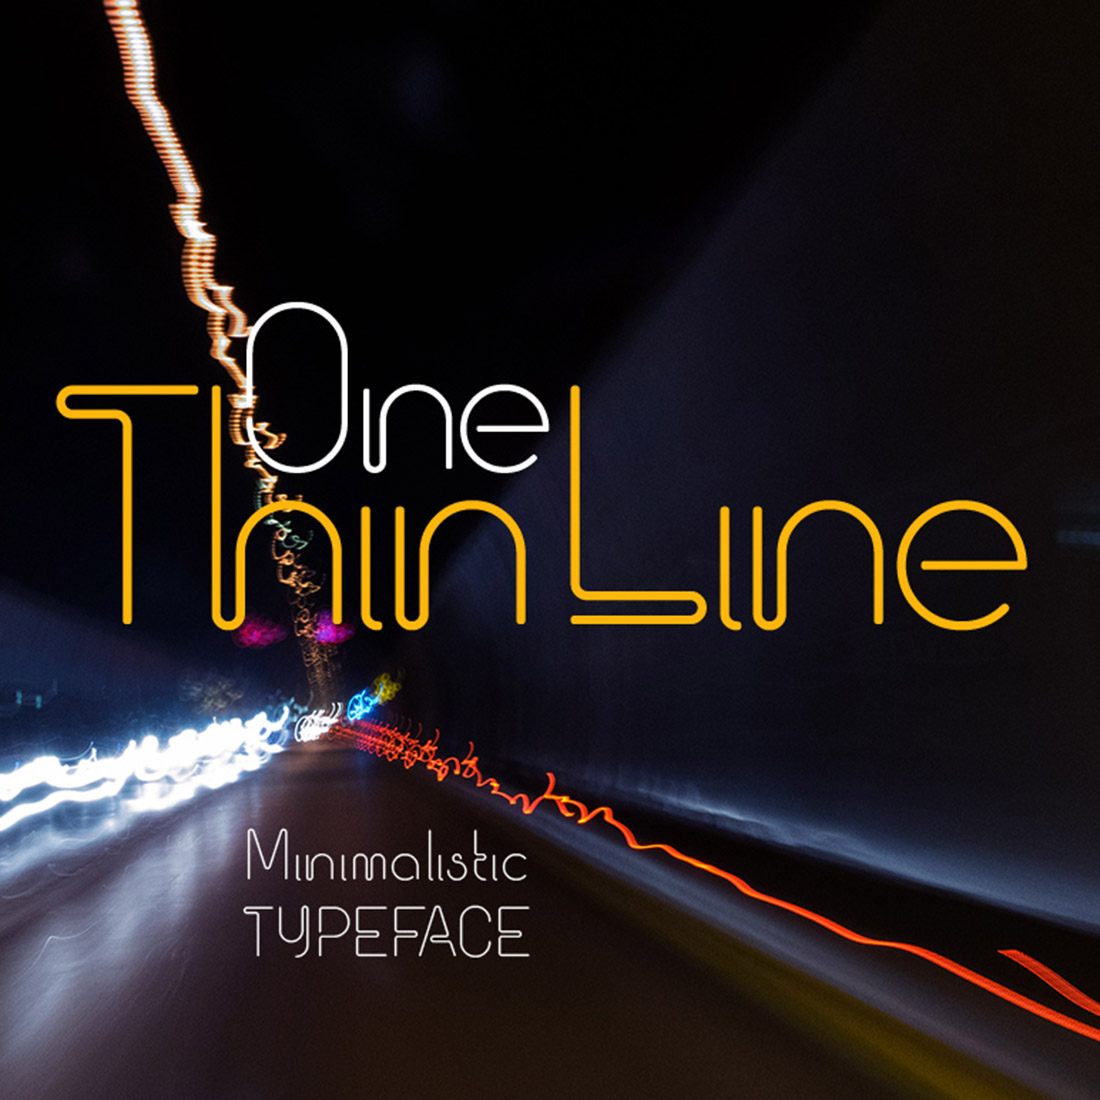 One Thin Line font cover.